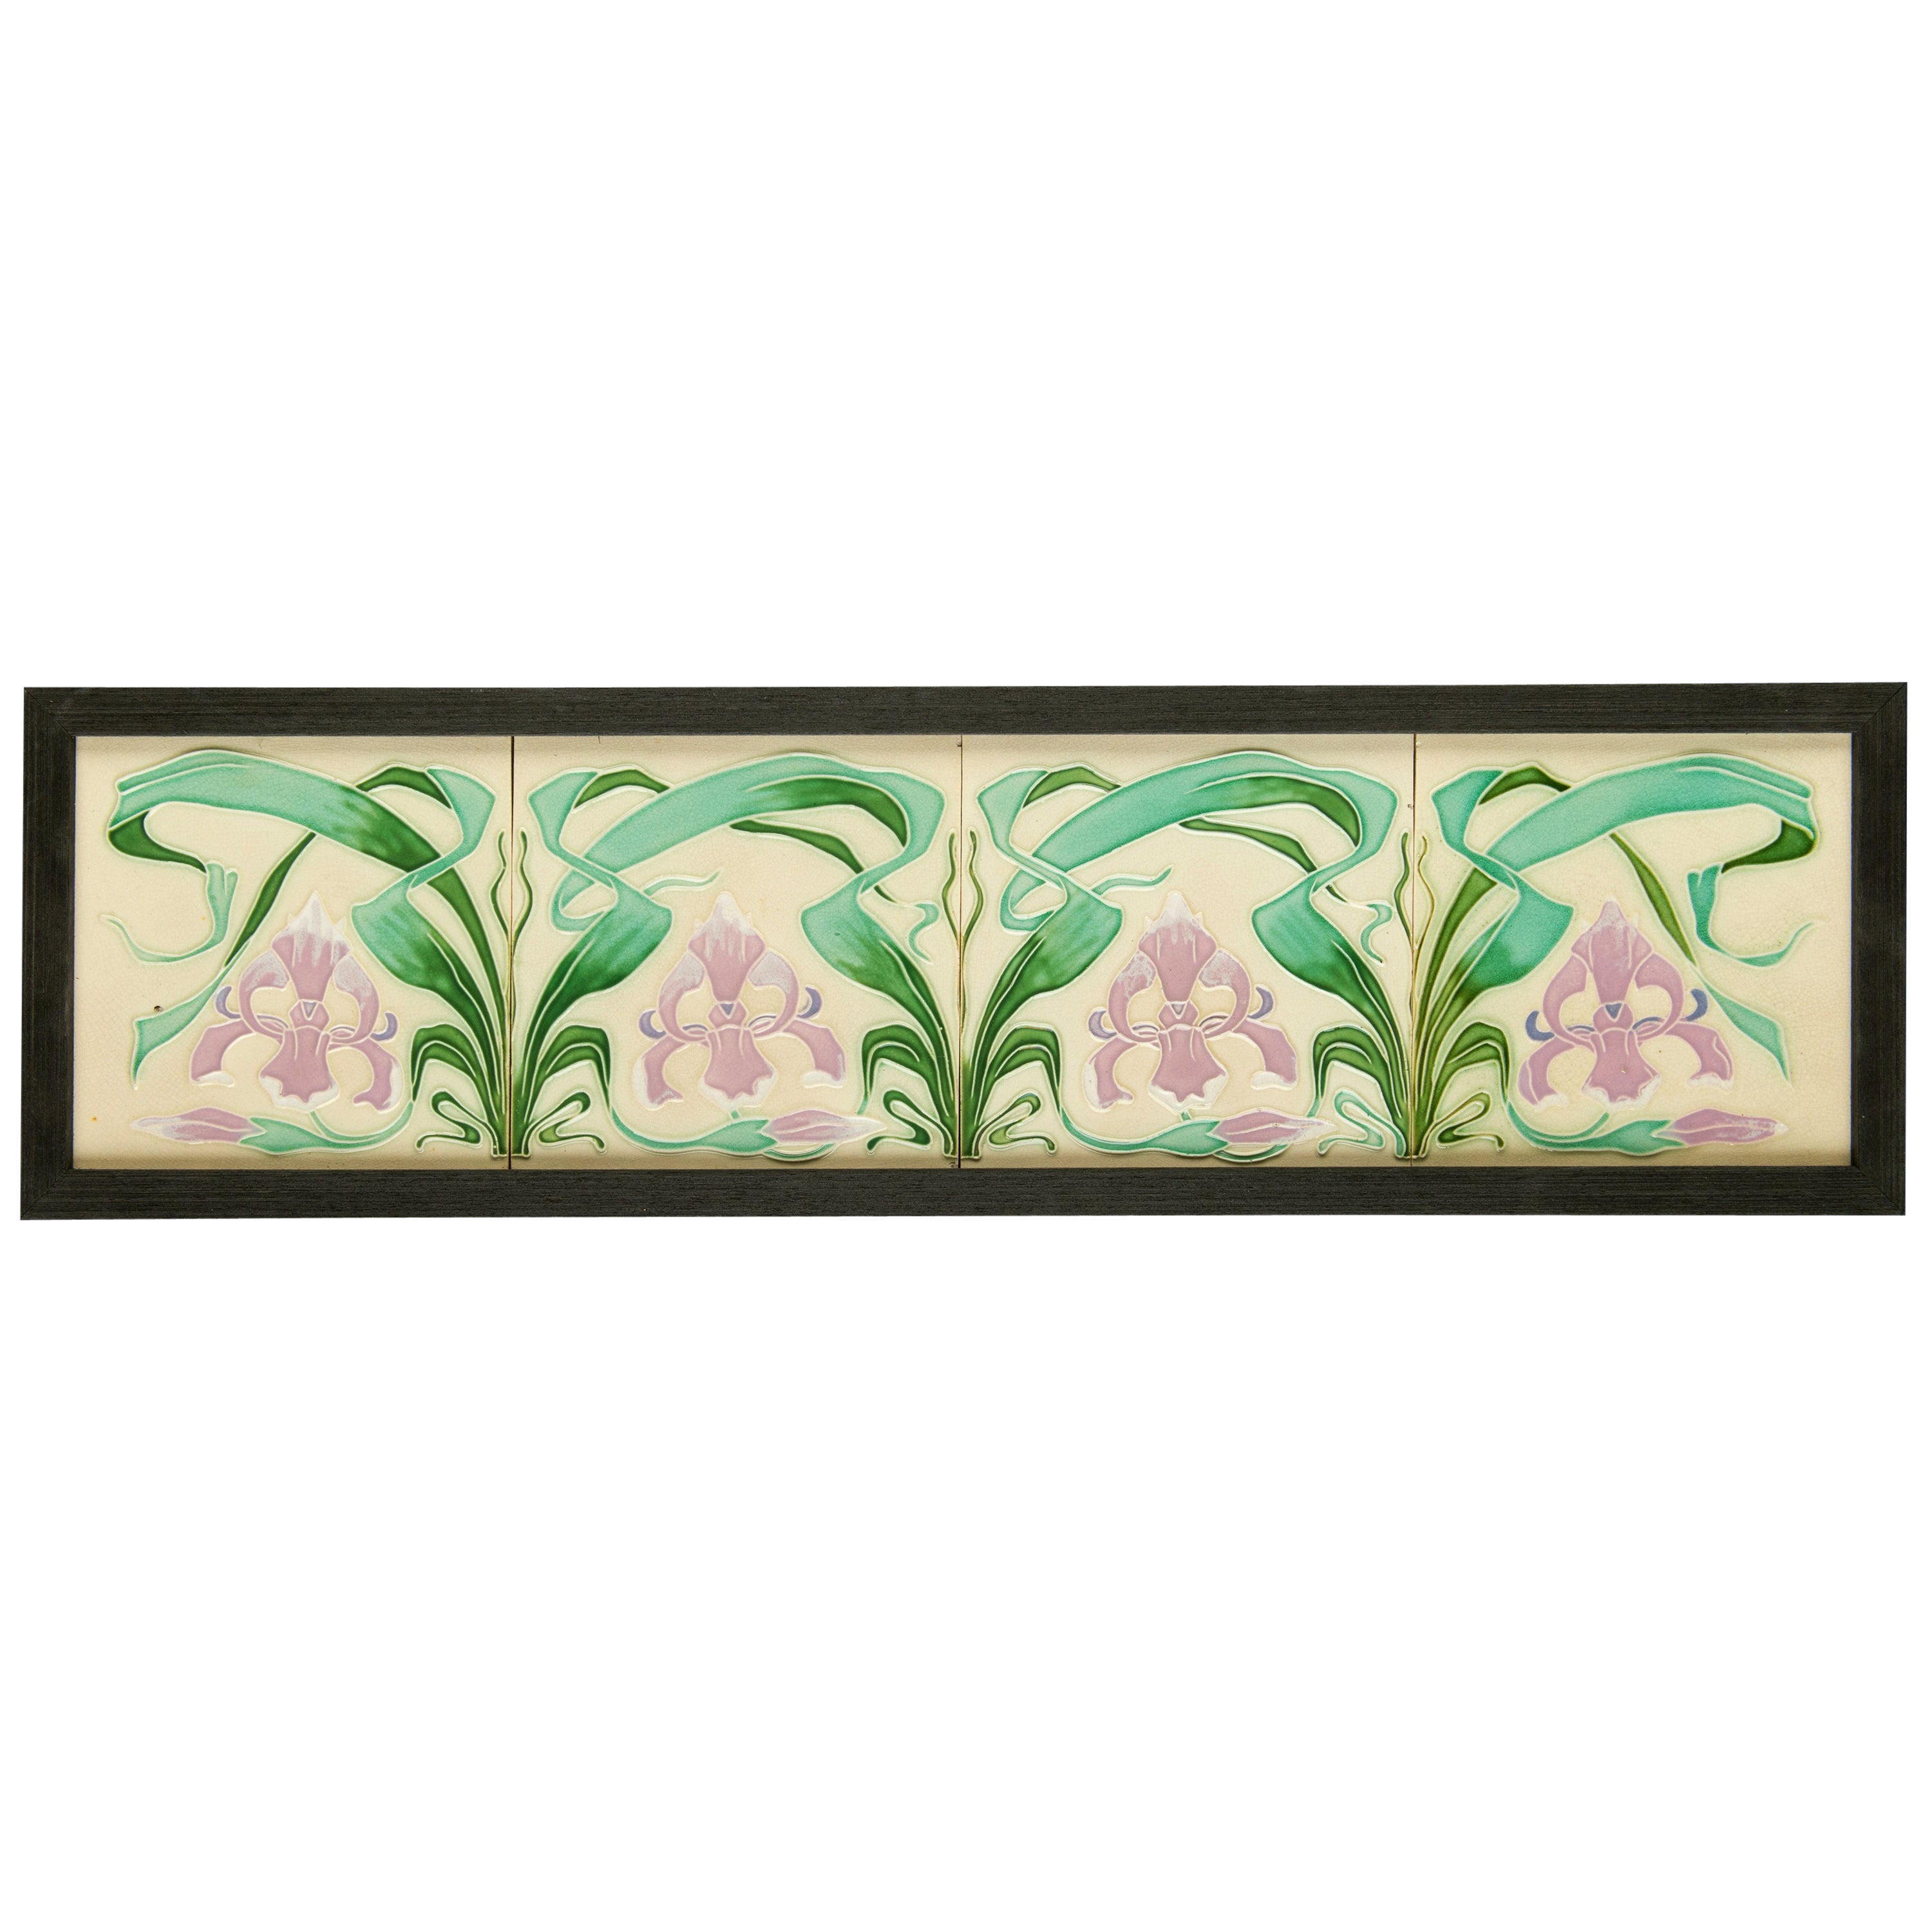 Art  Nouveau Ceramic tile 6 "  inserted in wood framed 8 X 8 Inches #9 